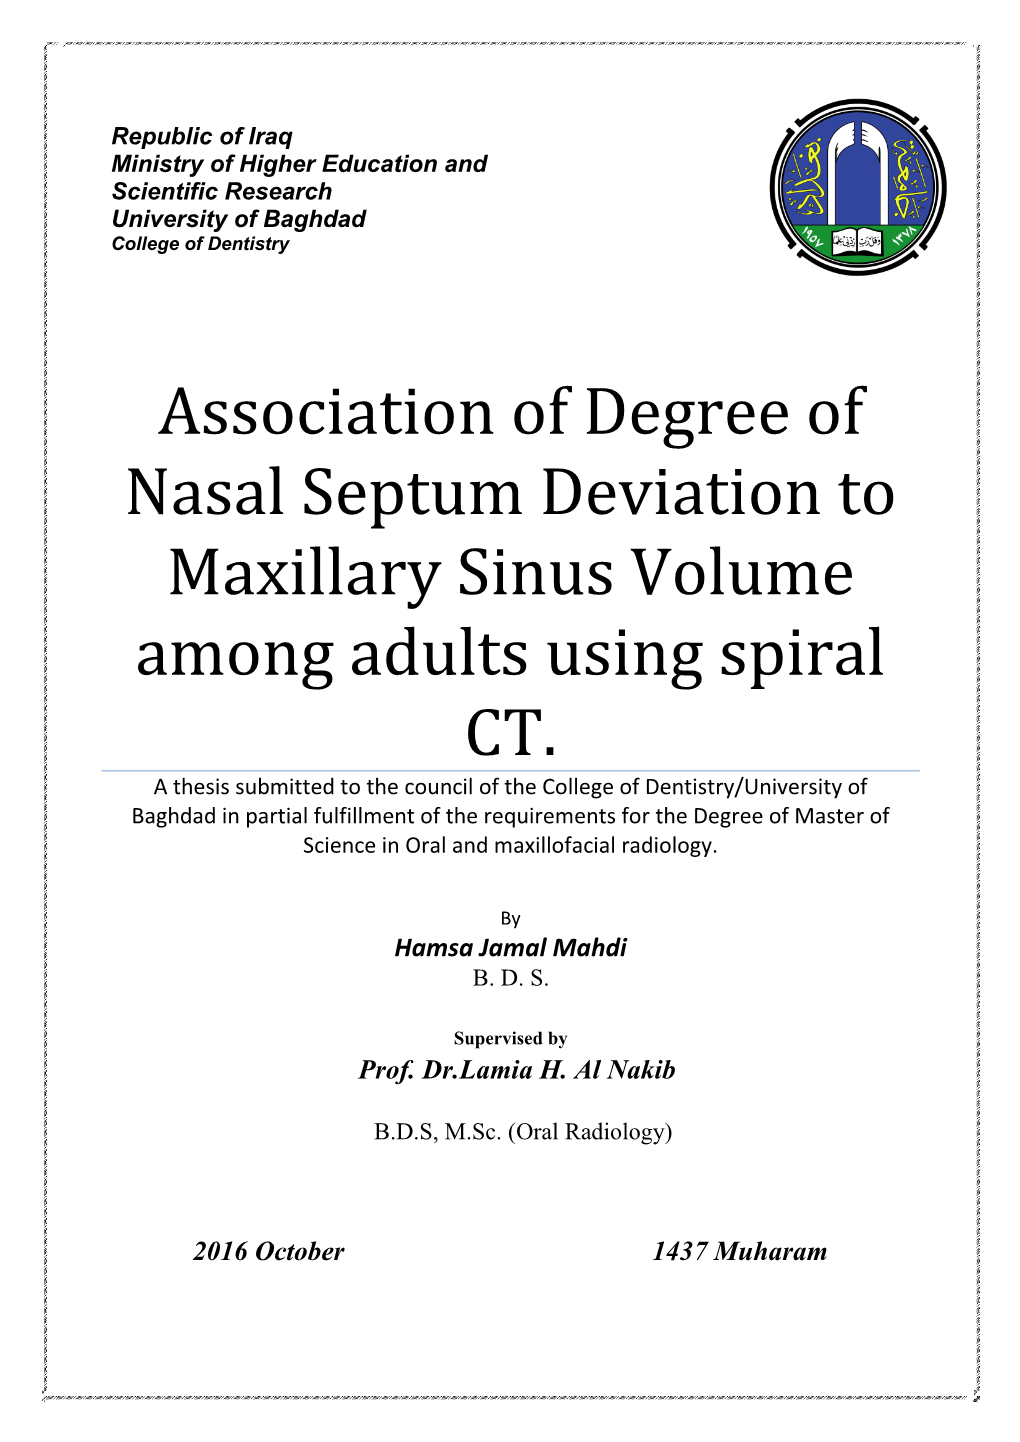 Association of Degree of Nasal Septum Deviation to Maxillary Sinus Volume Among Adults Using Spiral CT